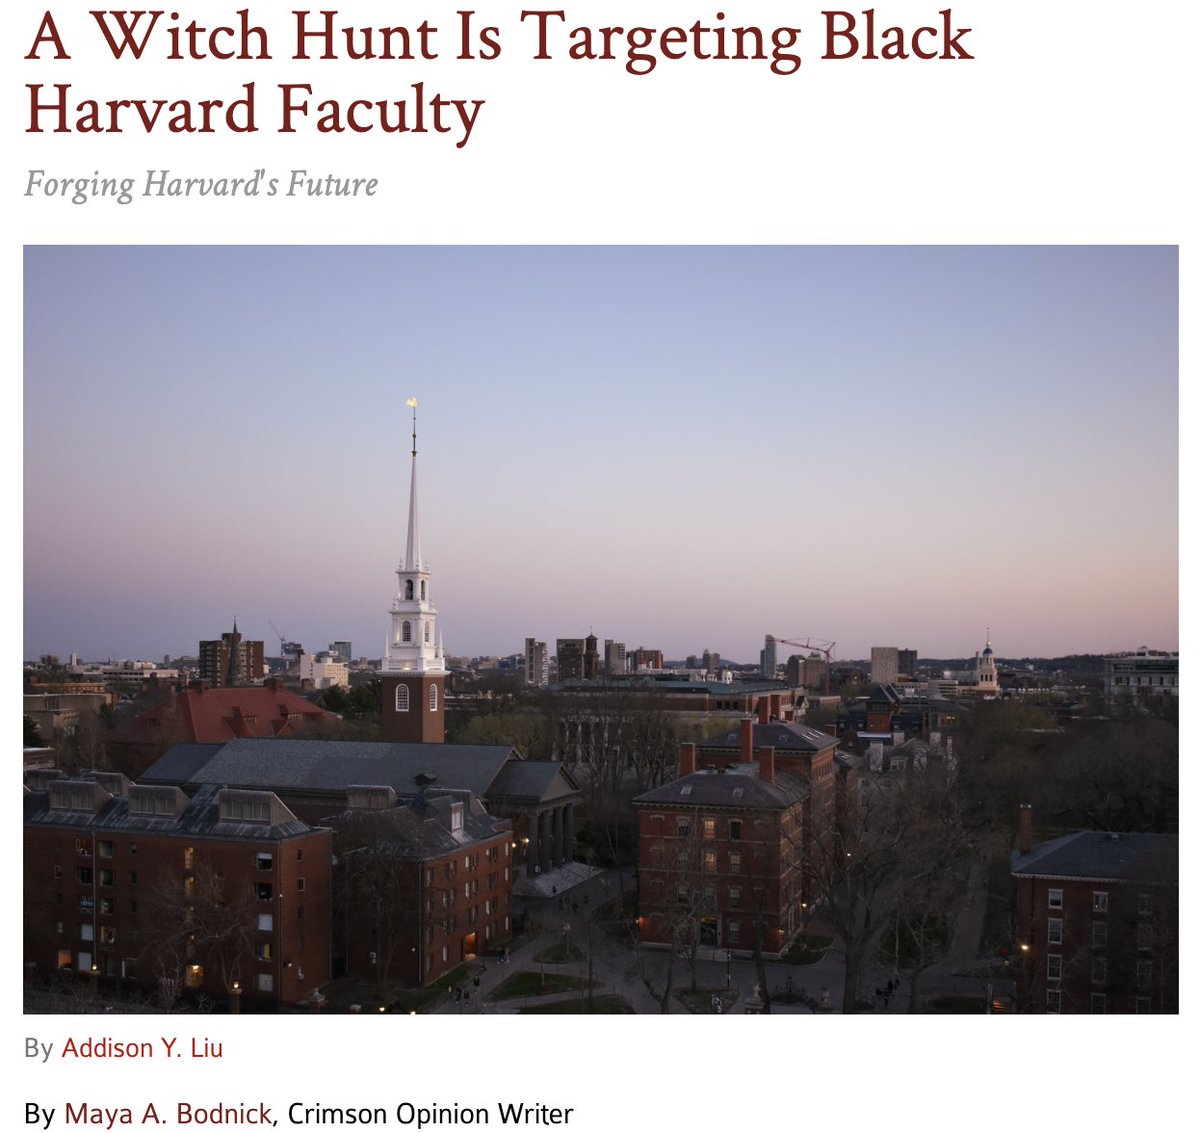 Chris Rufo & his allies are leading a plagiarism witch hunt and creating the false impression that Black women disproportionately plagiarize. Universities like Harvard must take back control of the narrative and conduct plagiarism reviews of all faculty. thecrimson.com/column/forging…